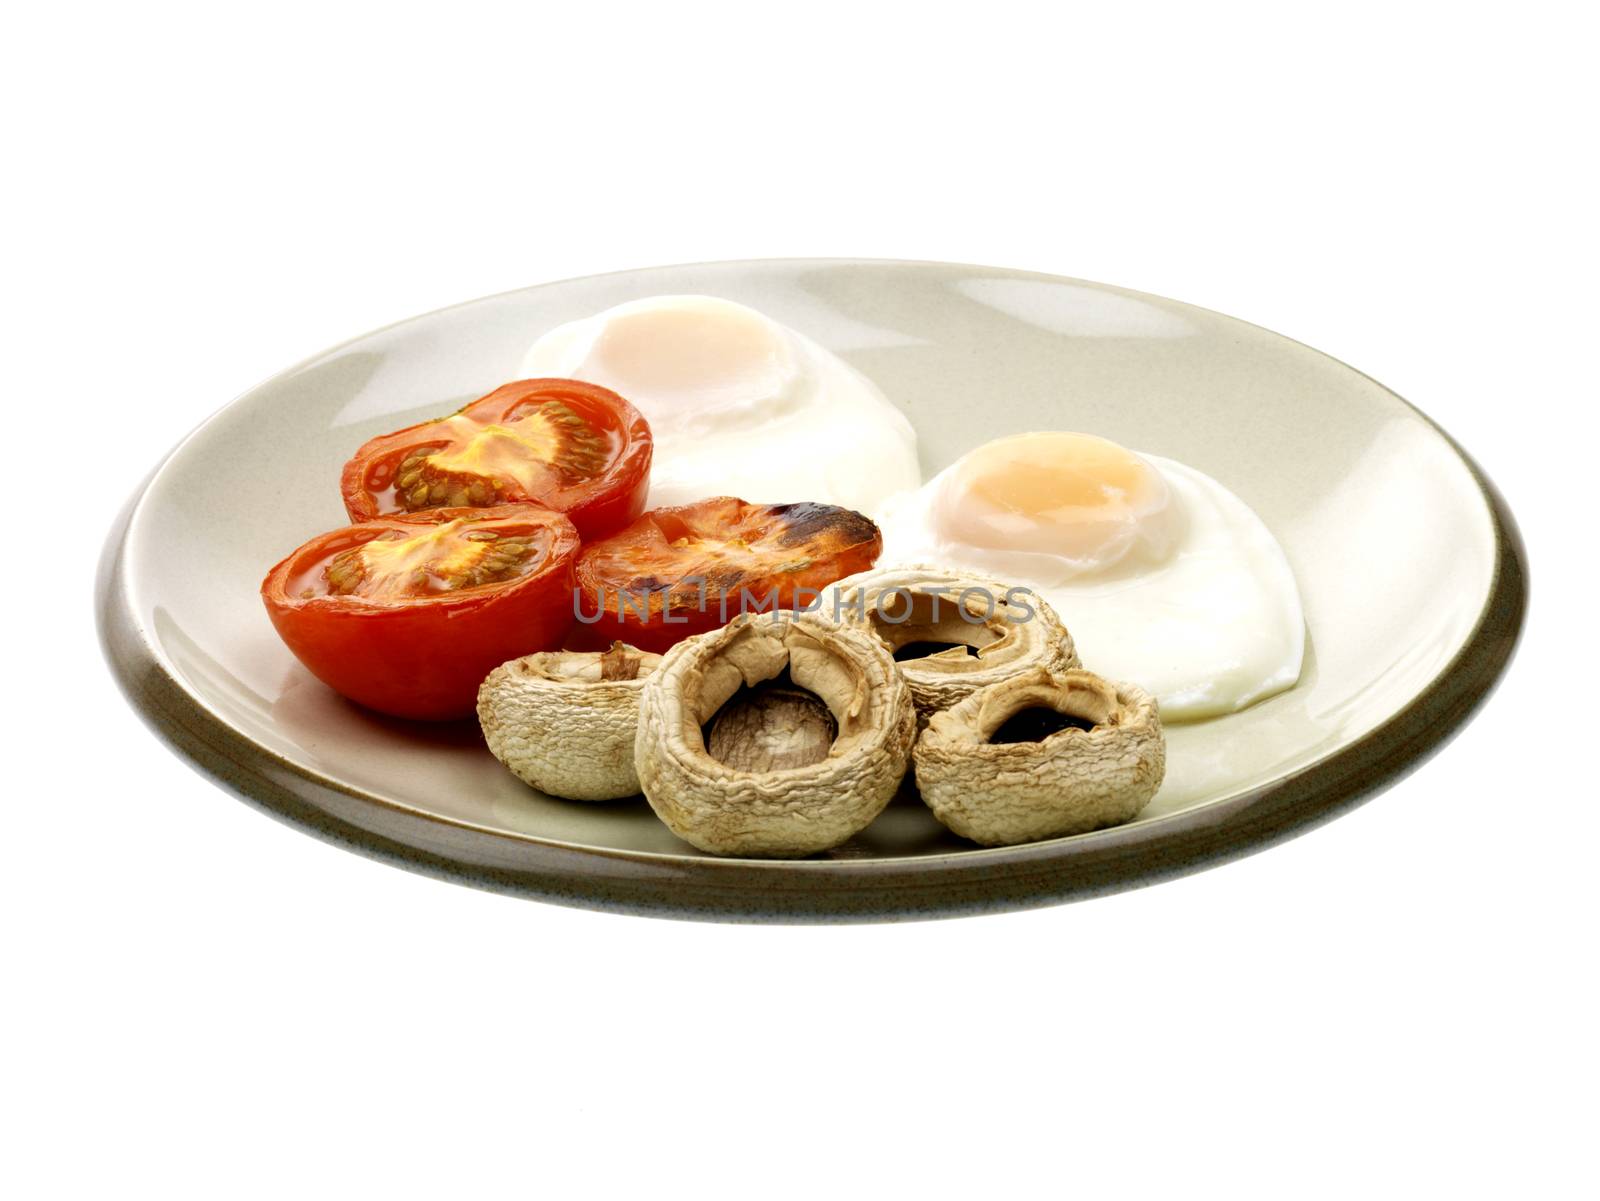 Poached Eggs With Grilled Tomatoes And Mushrooms